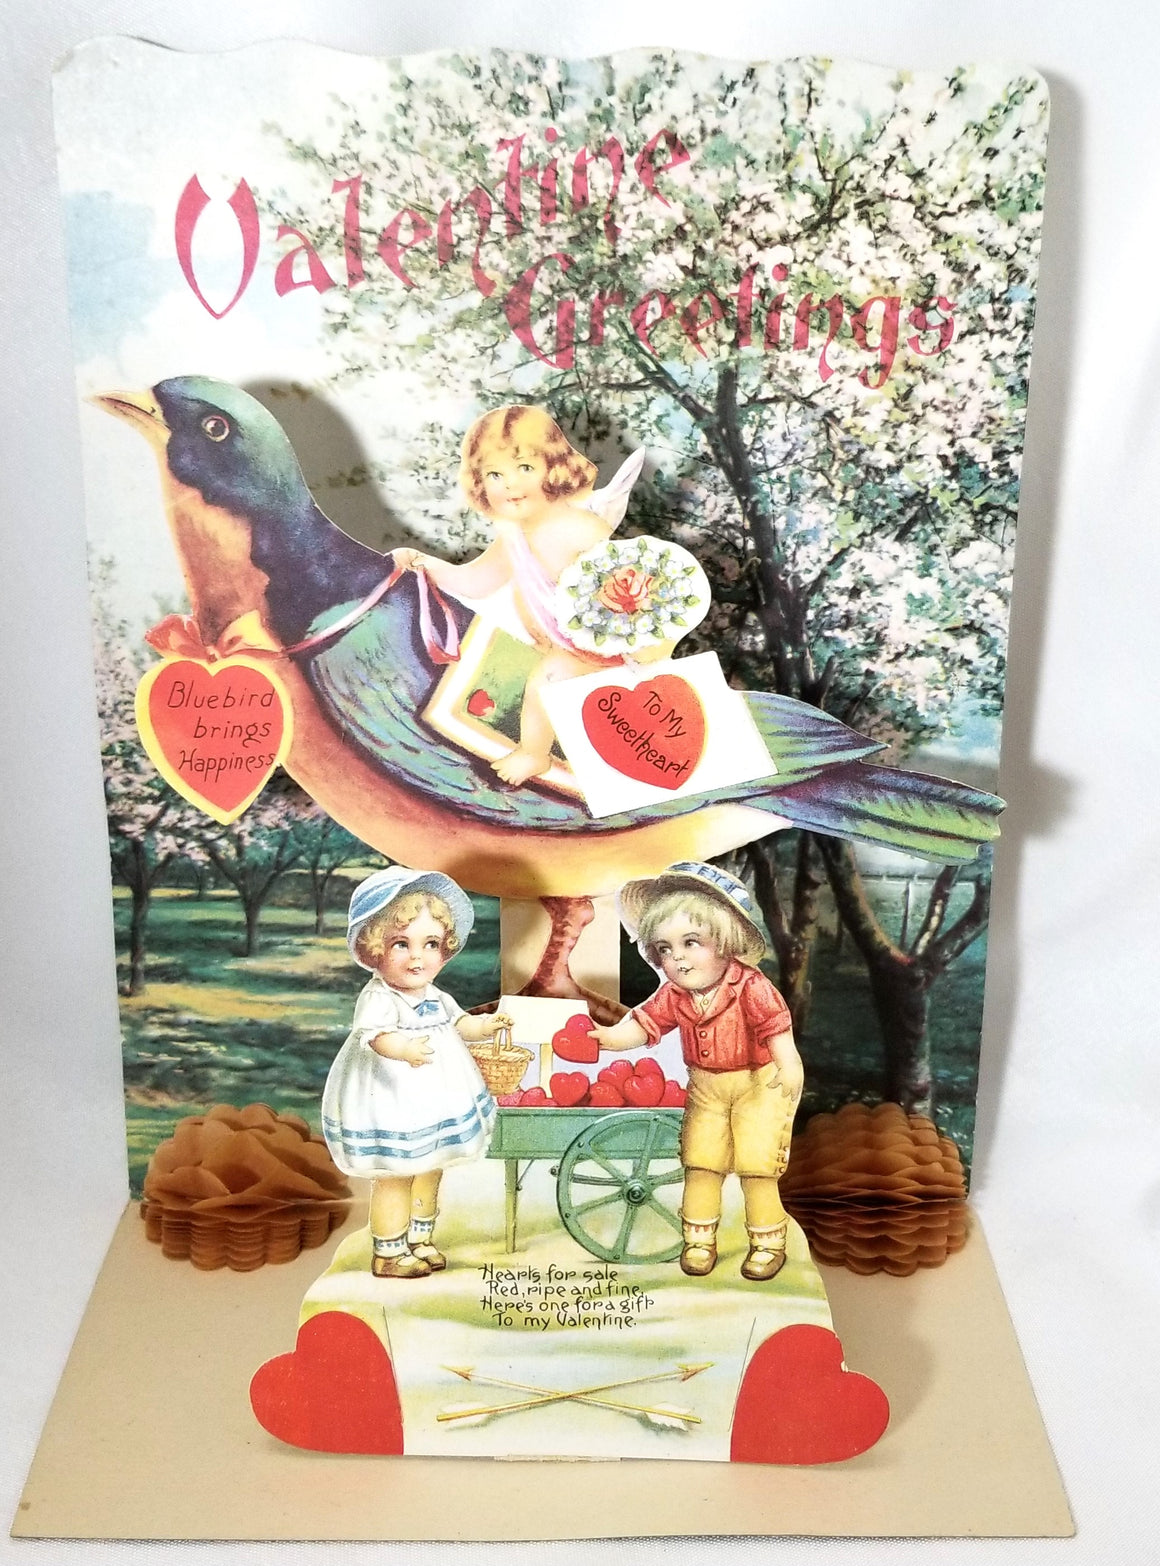 Vintage Valentine Cards Collection - ChristiesCurios